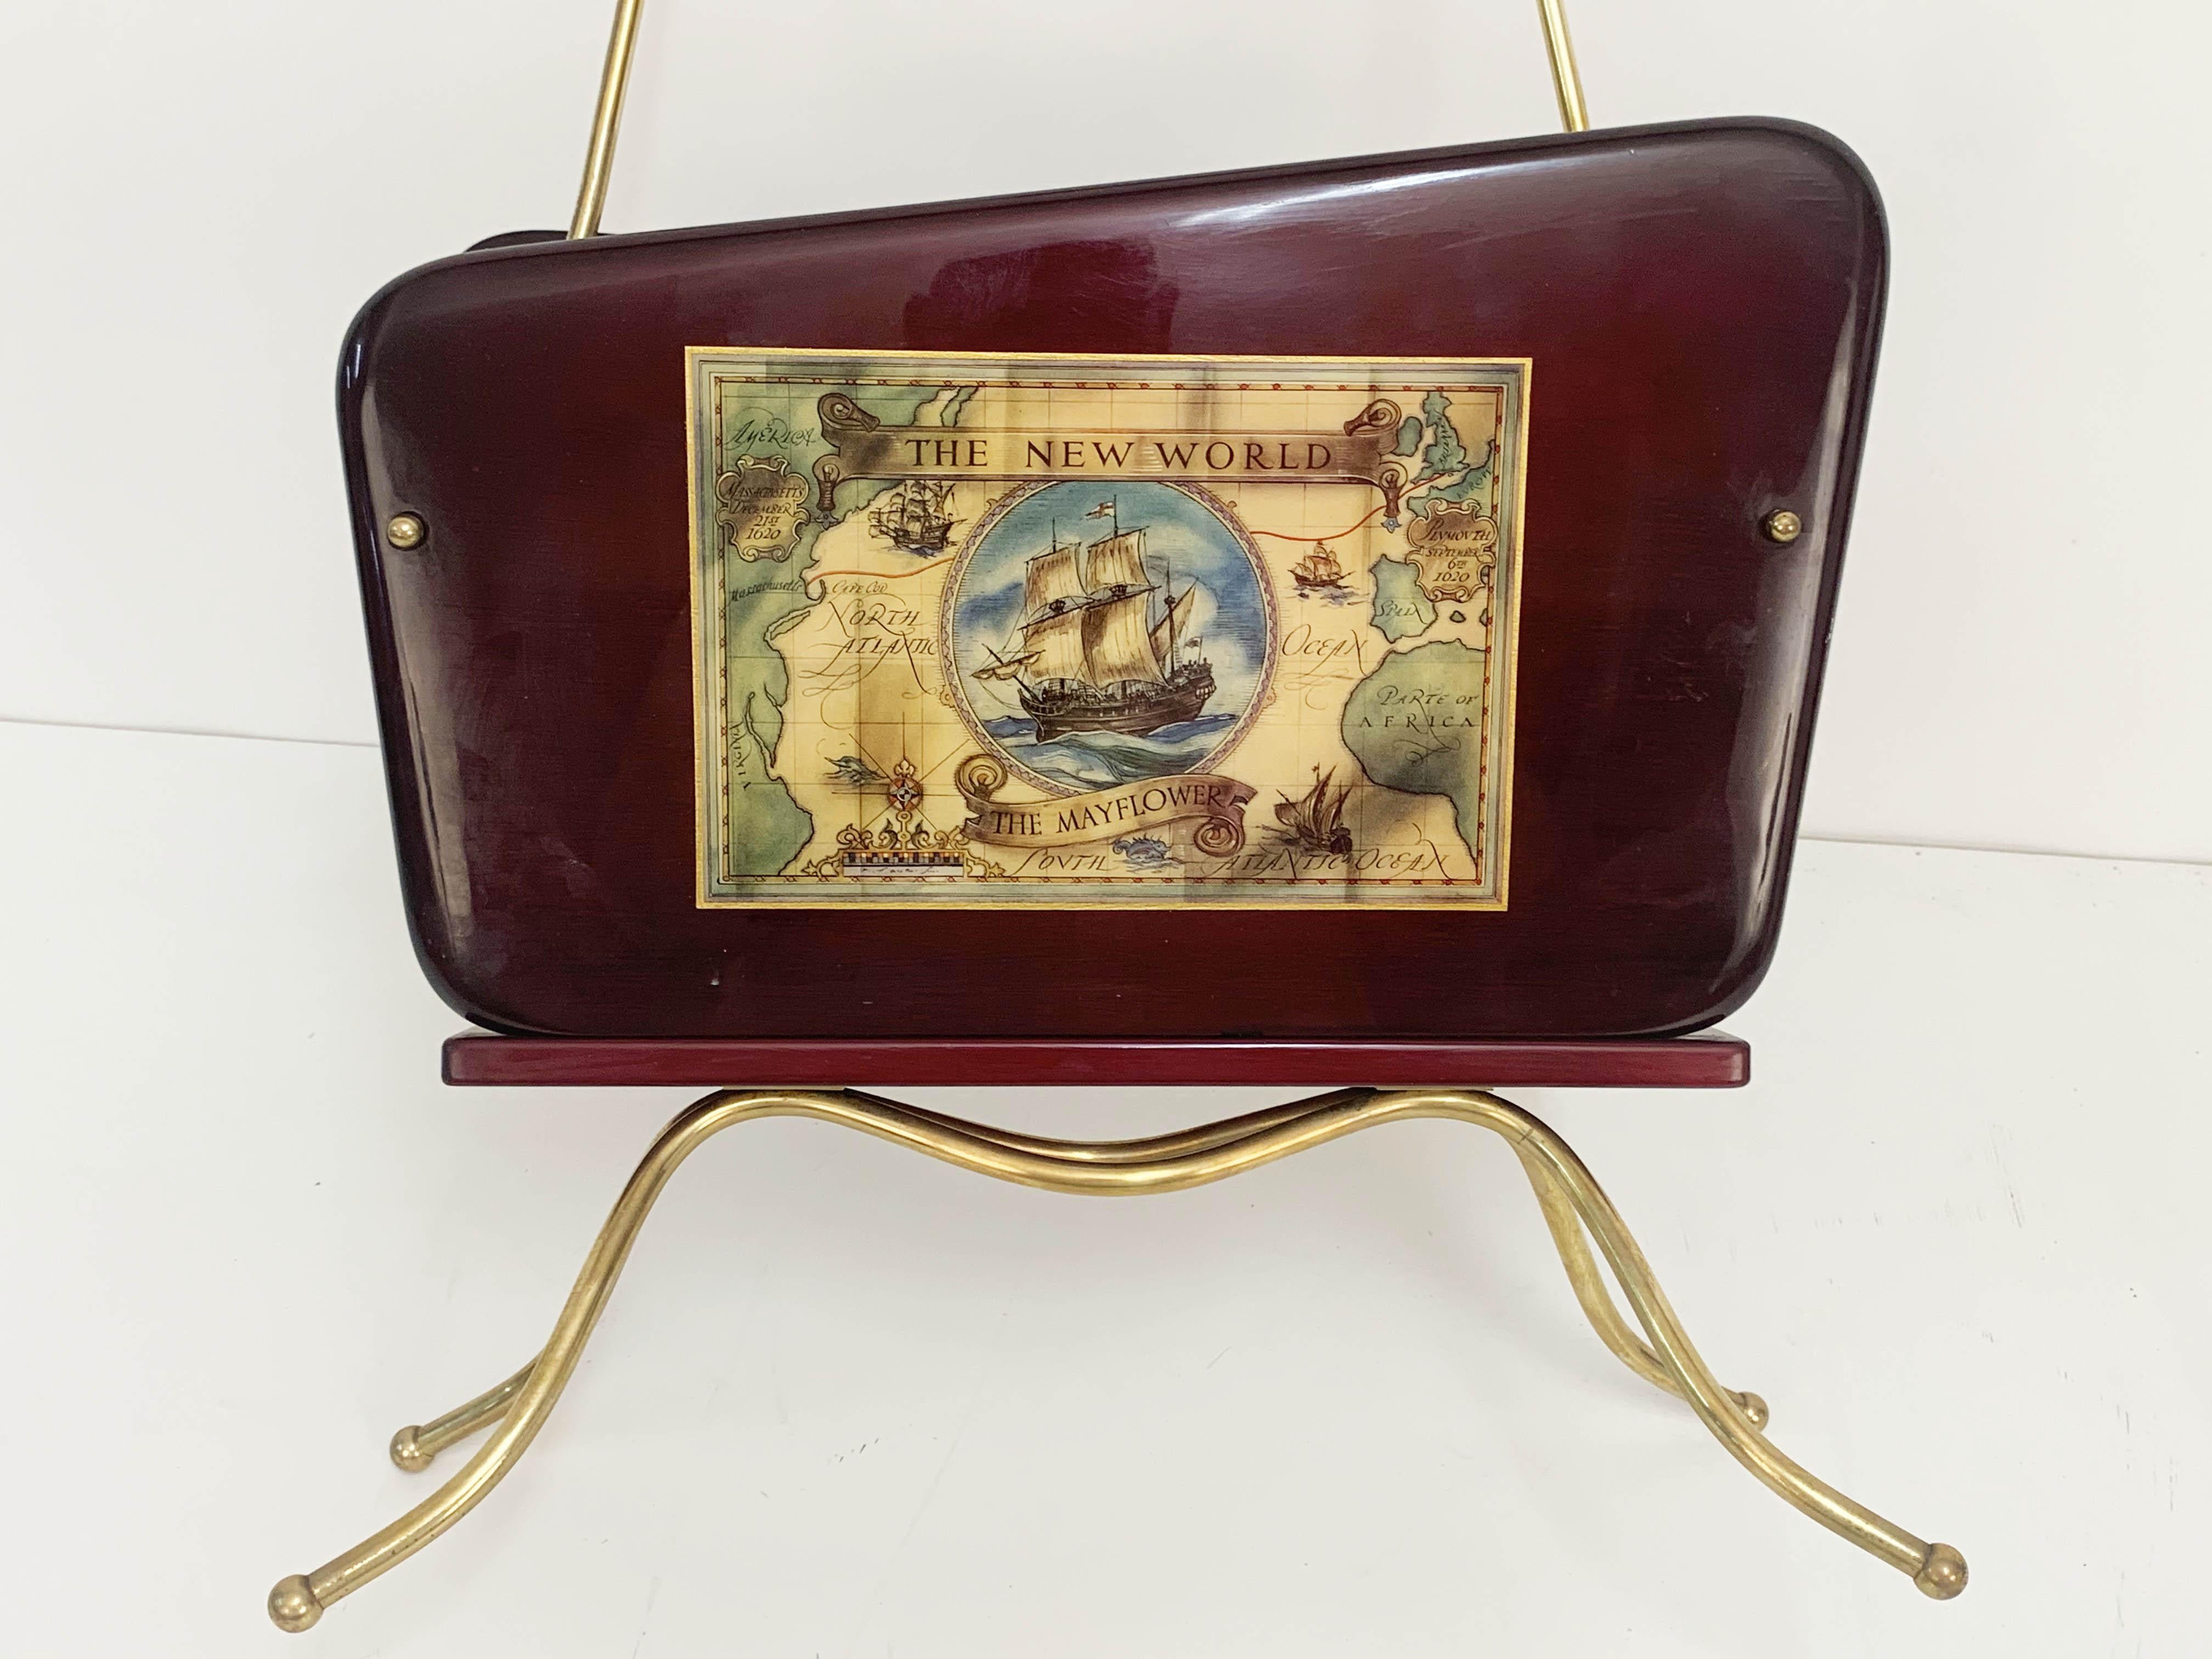 20th Century Gio Ponti Midcentury Wood and Brass Italian Magazine Rack with Handle, 1950s For Sale